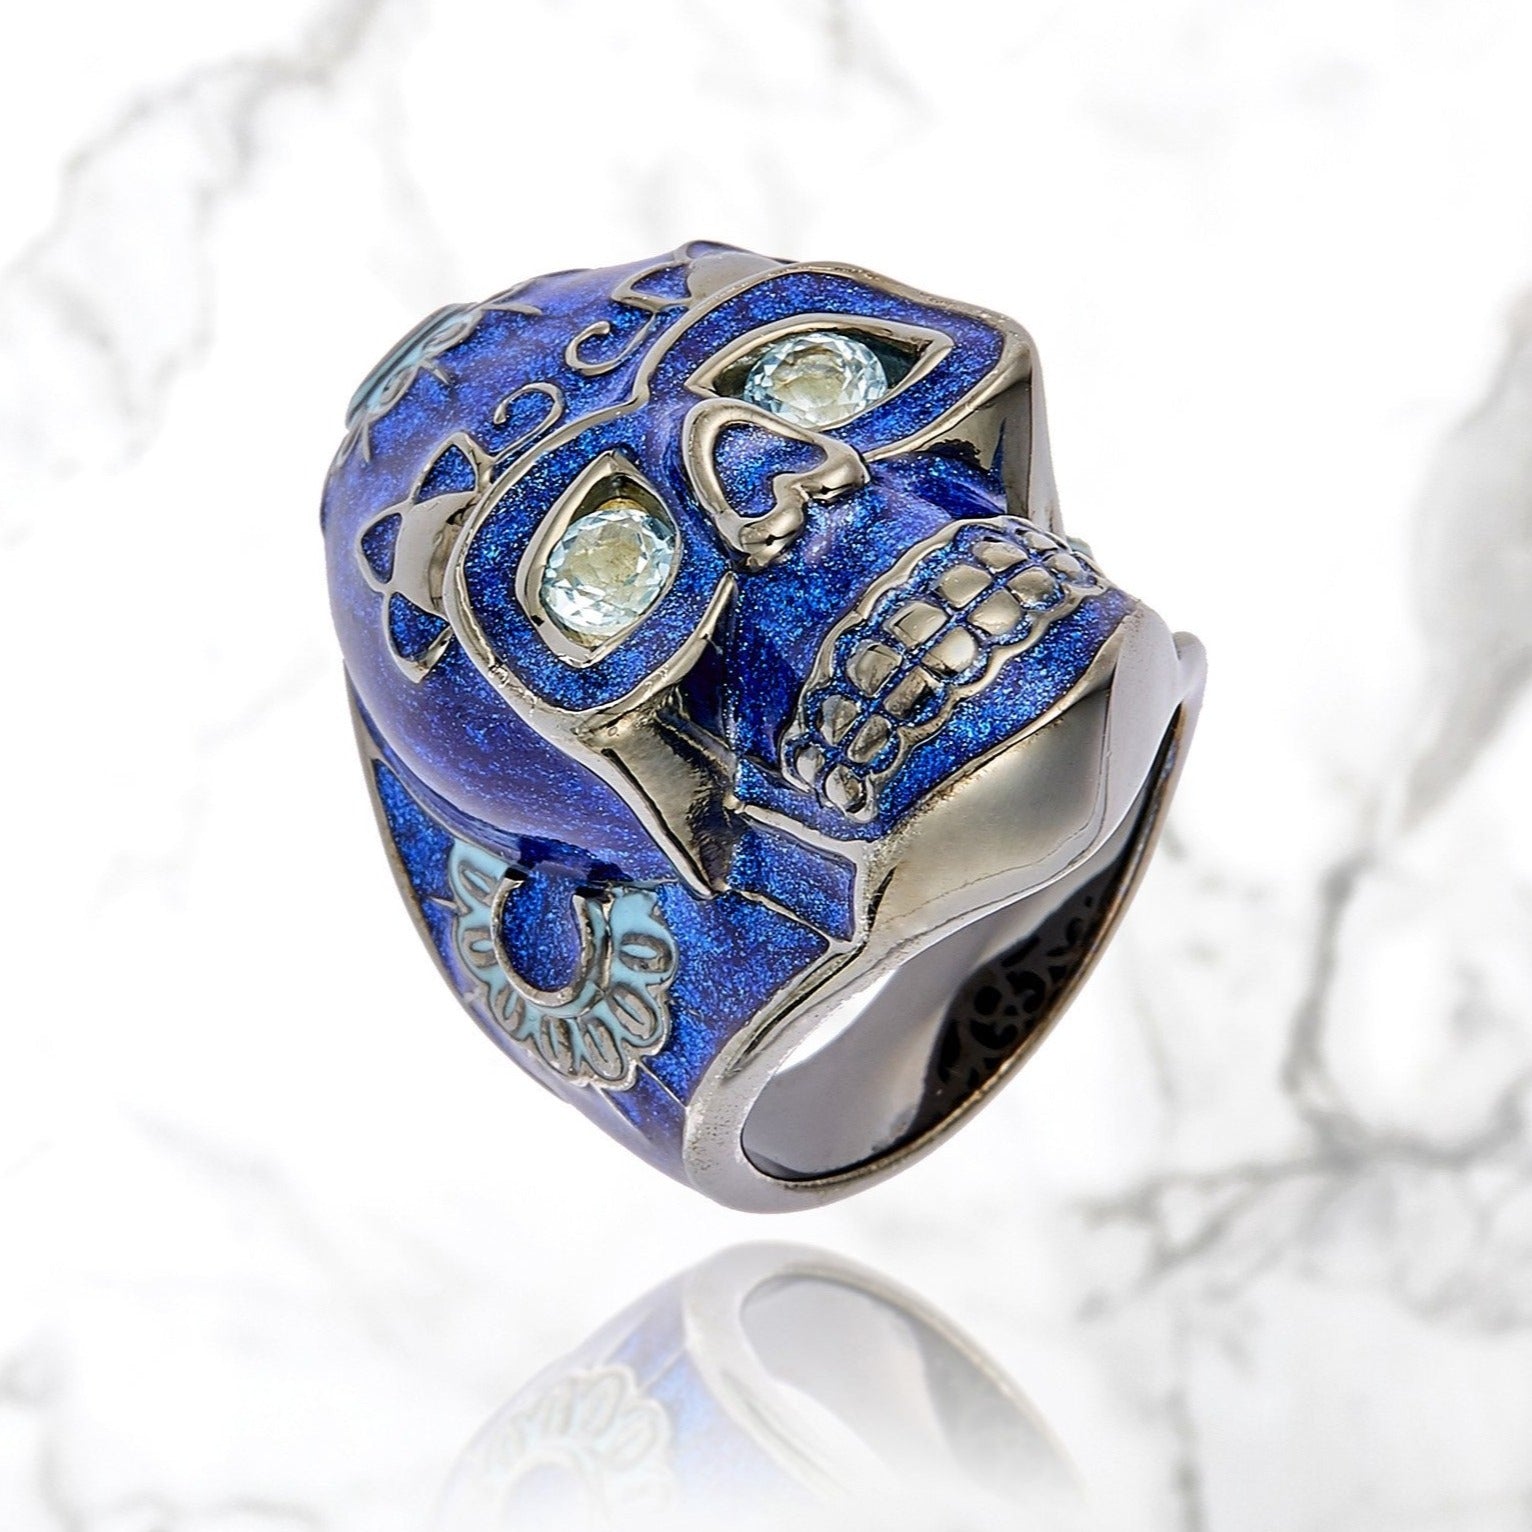 Dia De Los Muertos Skull Statement Ring in Silver with Blue Enamels and Blue Topaz